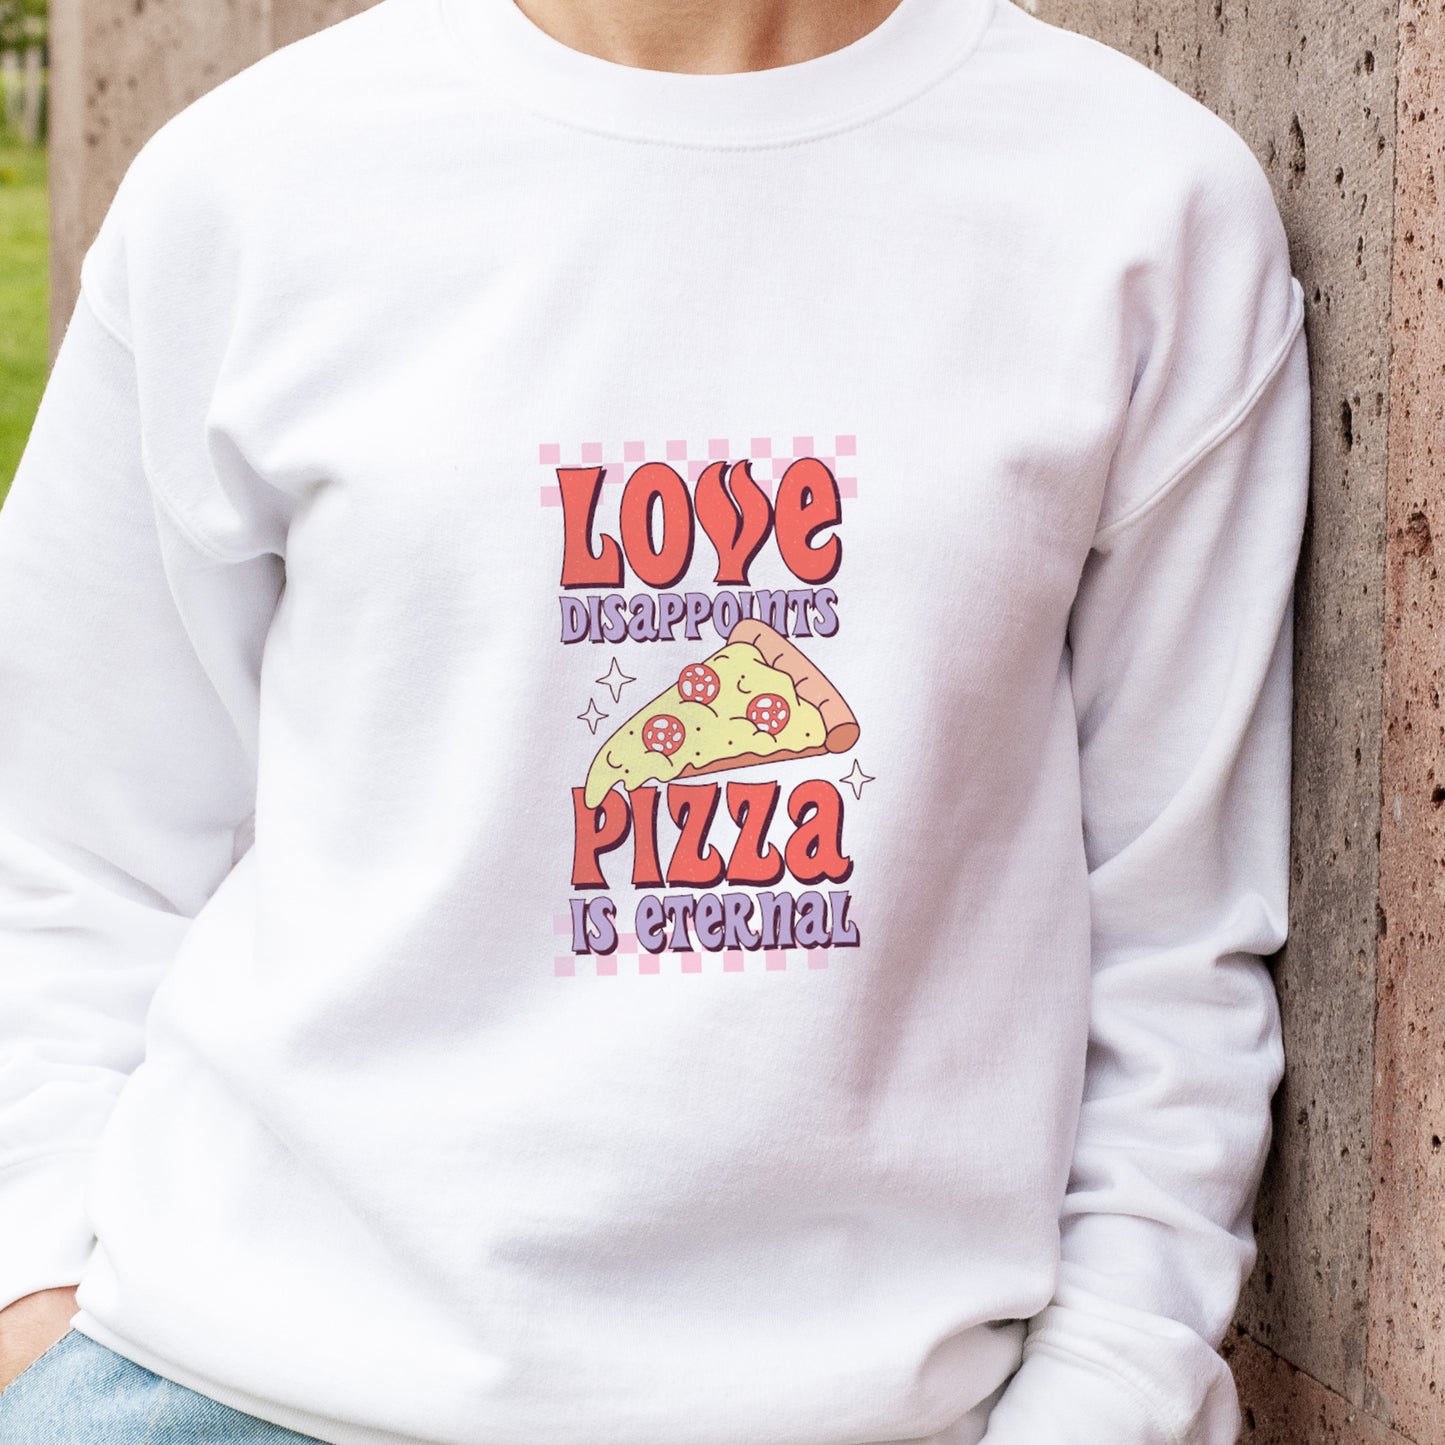 Love disappoints pizza is eternal sweatshirt casual style